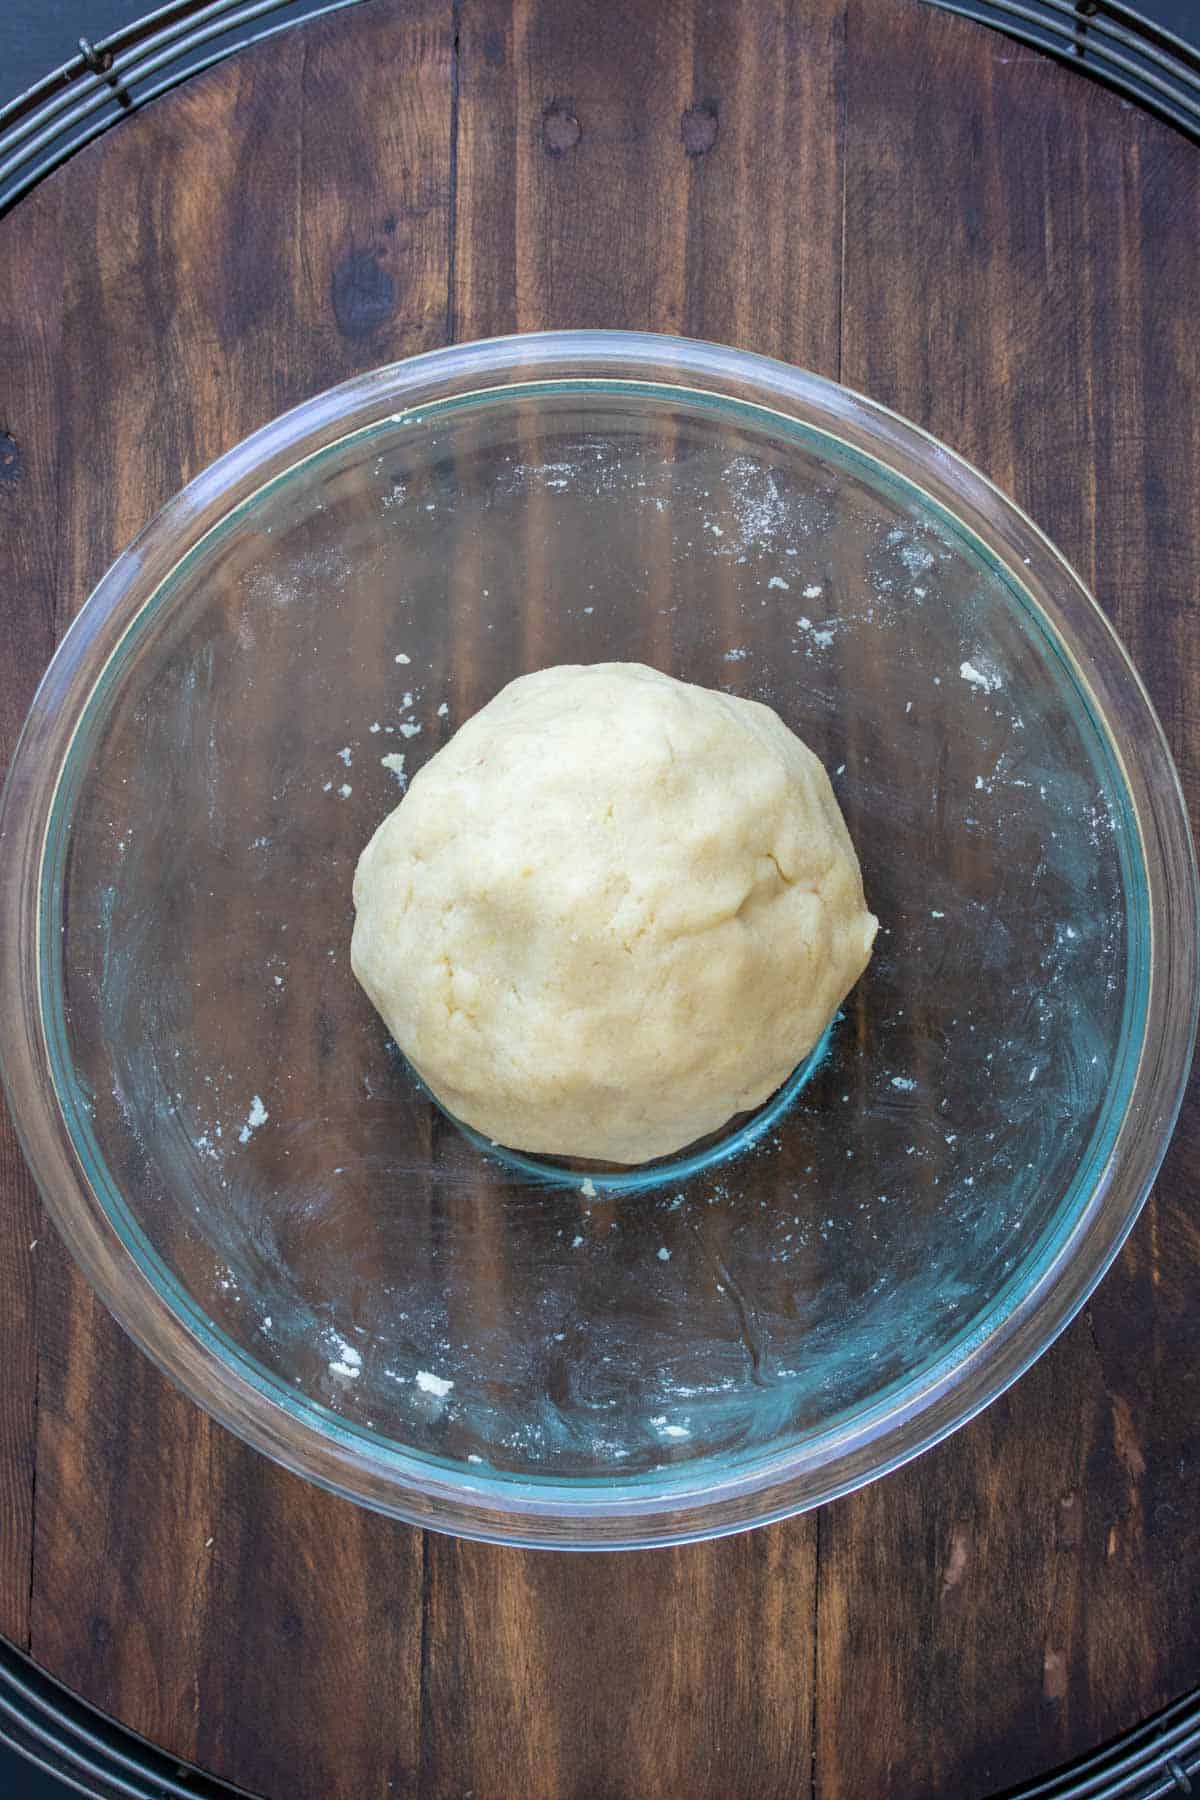 Pie dough ball in a glass bowl on a wooden table